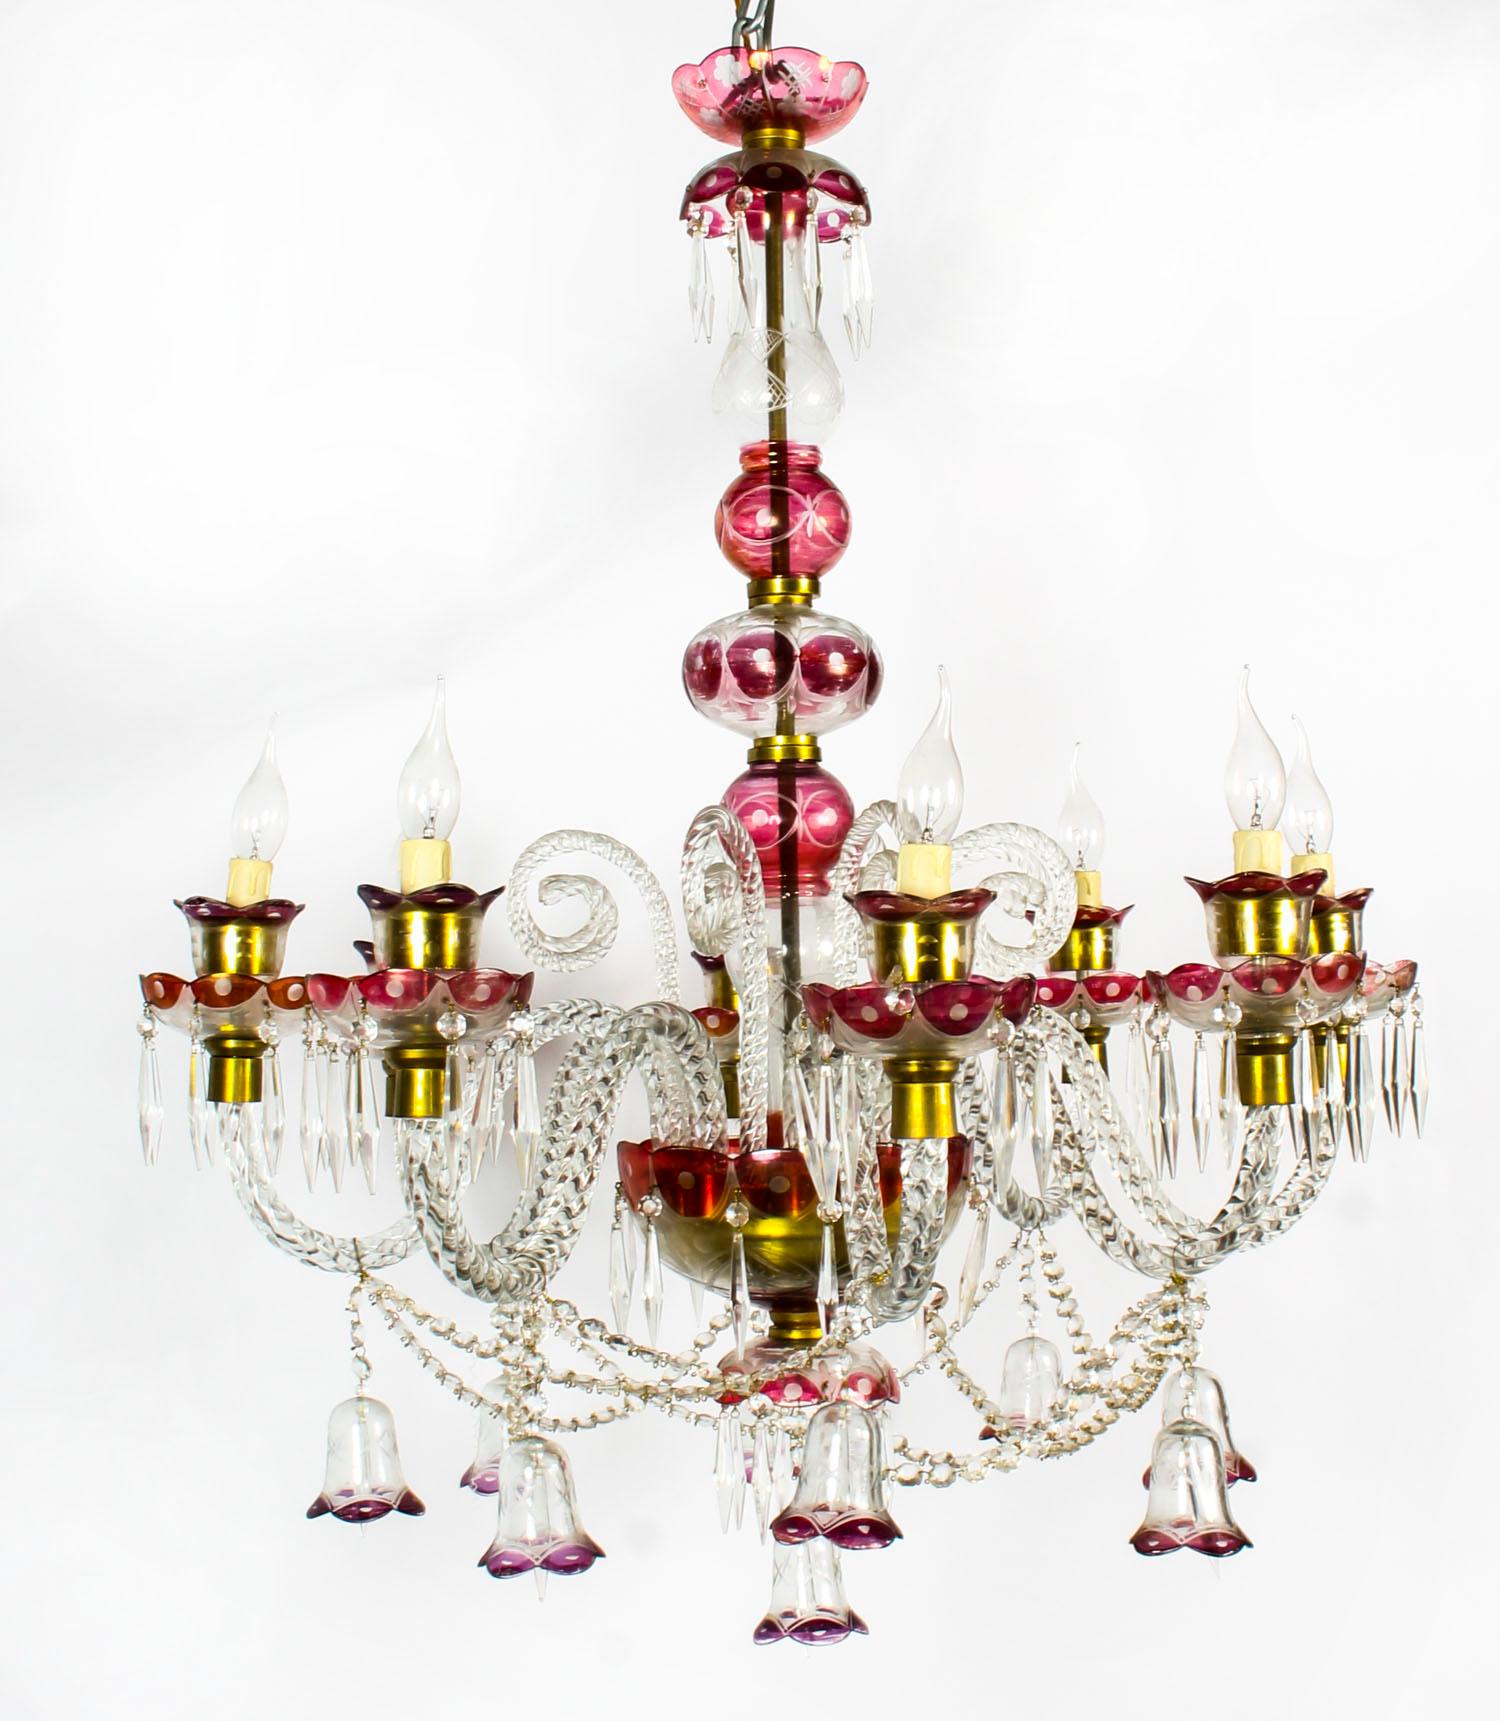 This is a beautiful pair of antique Venetian crystal chandeliers with eight lights, circa 1900 in date.

The delicate and elaborate hand blown clear crystal with cranberry red highlights. The chandeliers feature eight scrolled sconces each arm